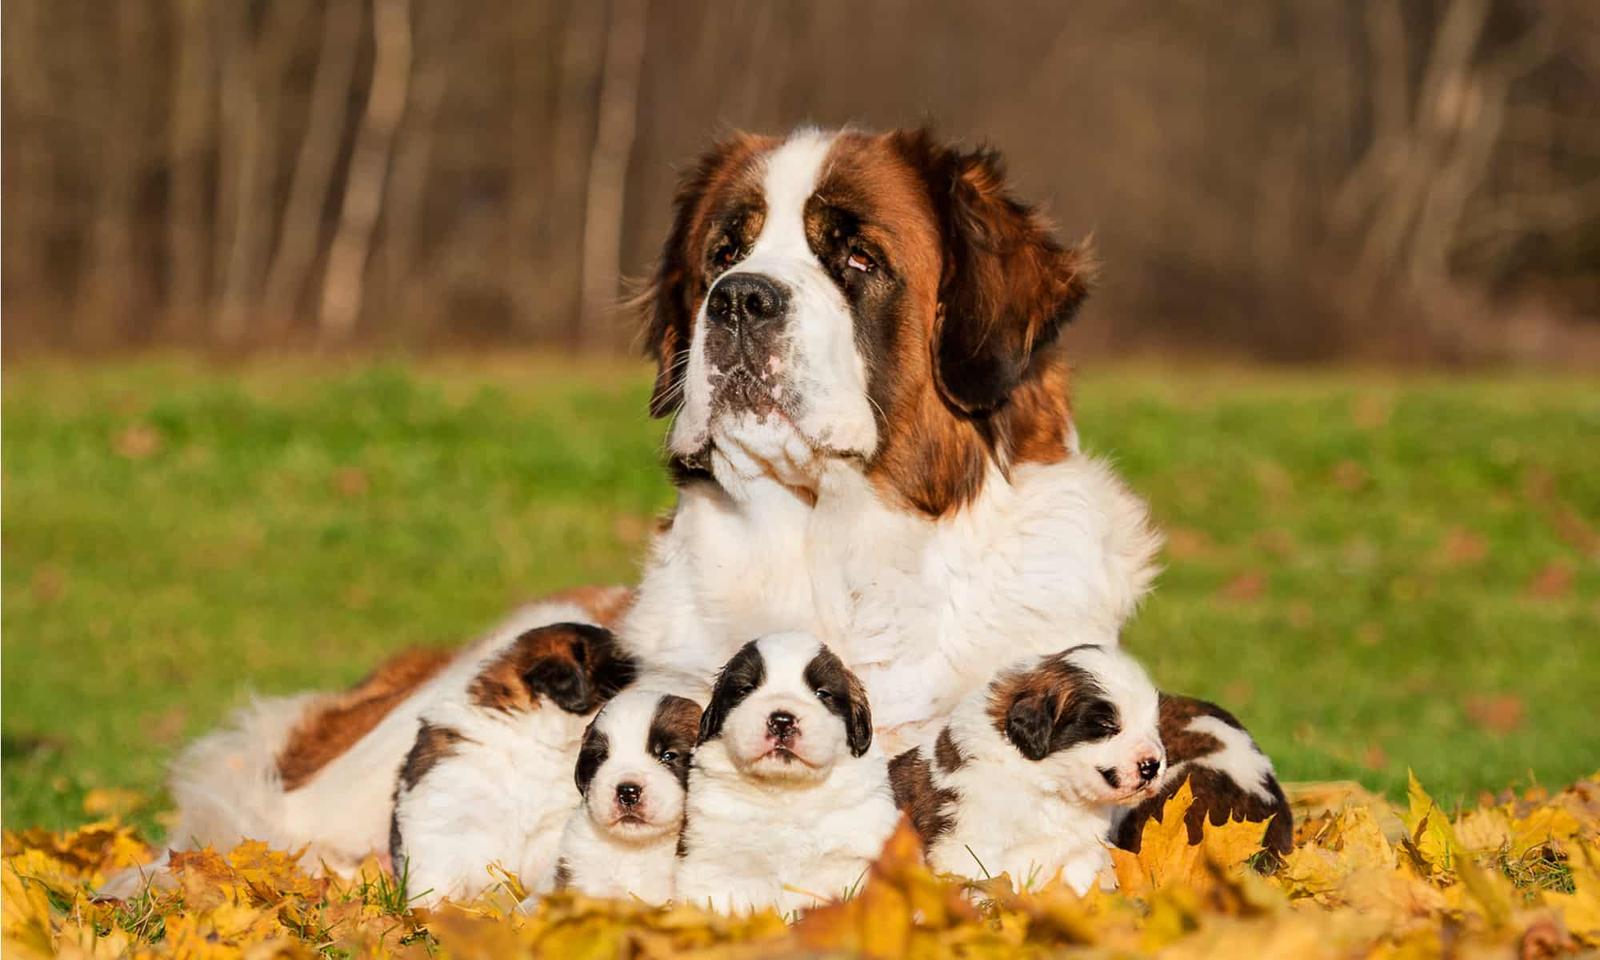 Which Big Dog And Small Dog Are You A Combination Of? 🐶 Quiz St. Saint Bernard